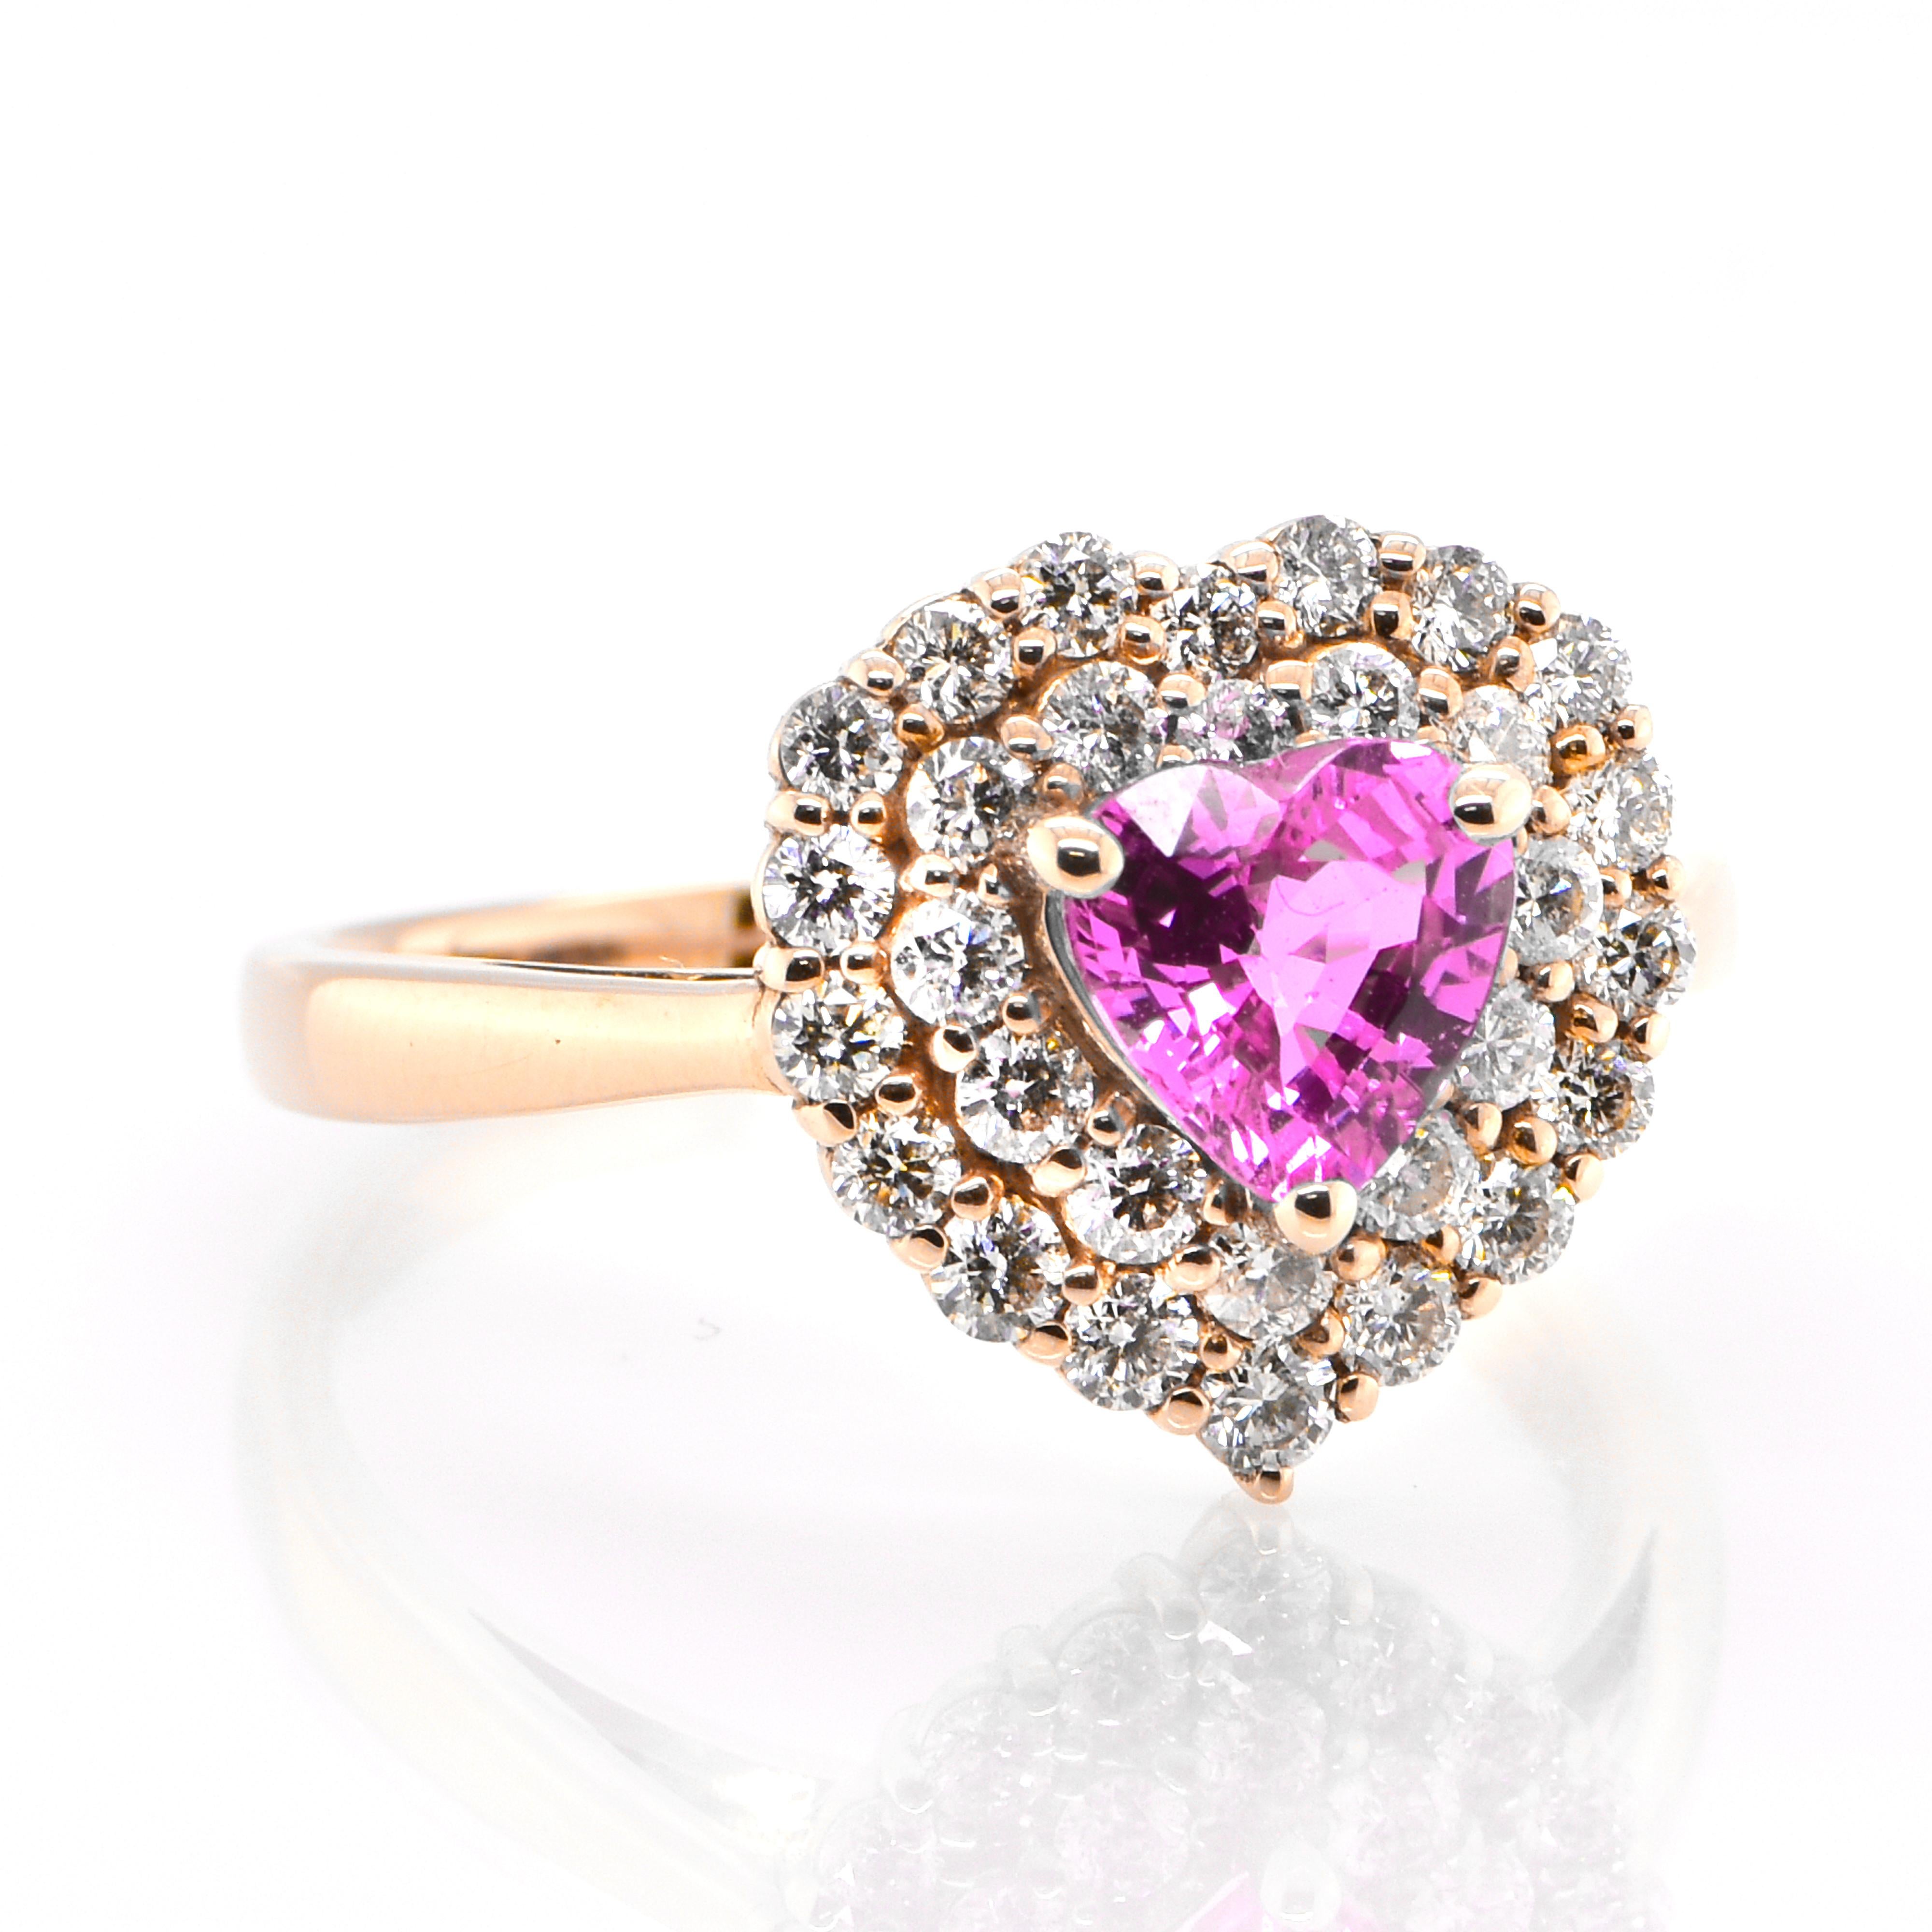 A beautiful ring featuring 1.06 Carat Natural Pink Sapphire and 0.65 Carats Diamond Accents set in 18 Karat Pink Gold. Sapphires have extraordinary durability - they excel in hardness as well as toughness and durability making them very popular in